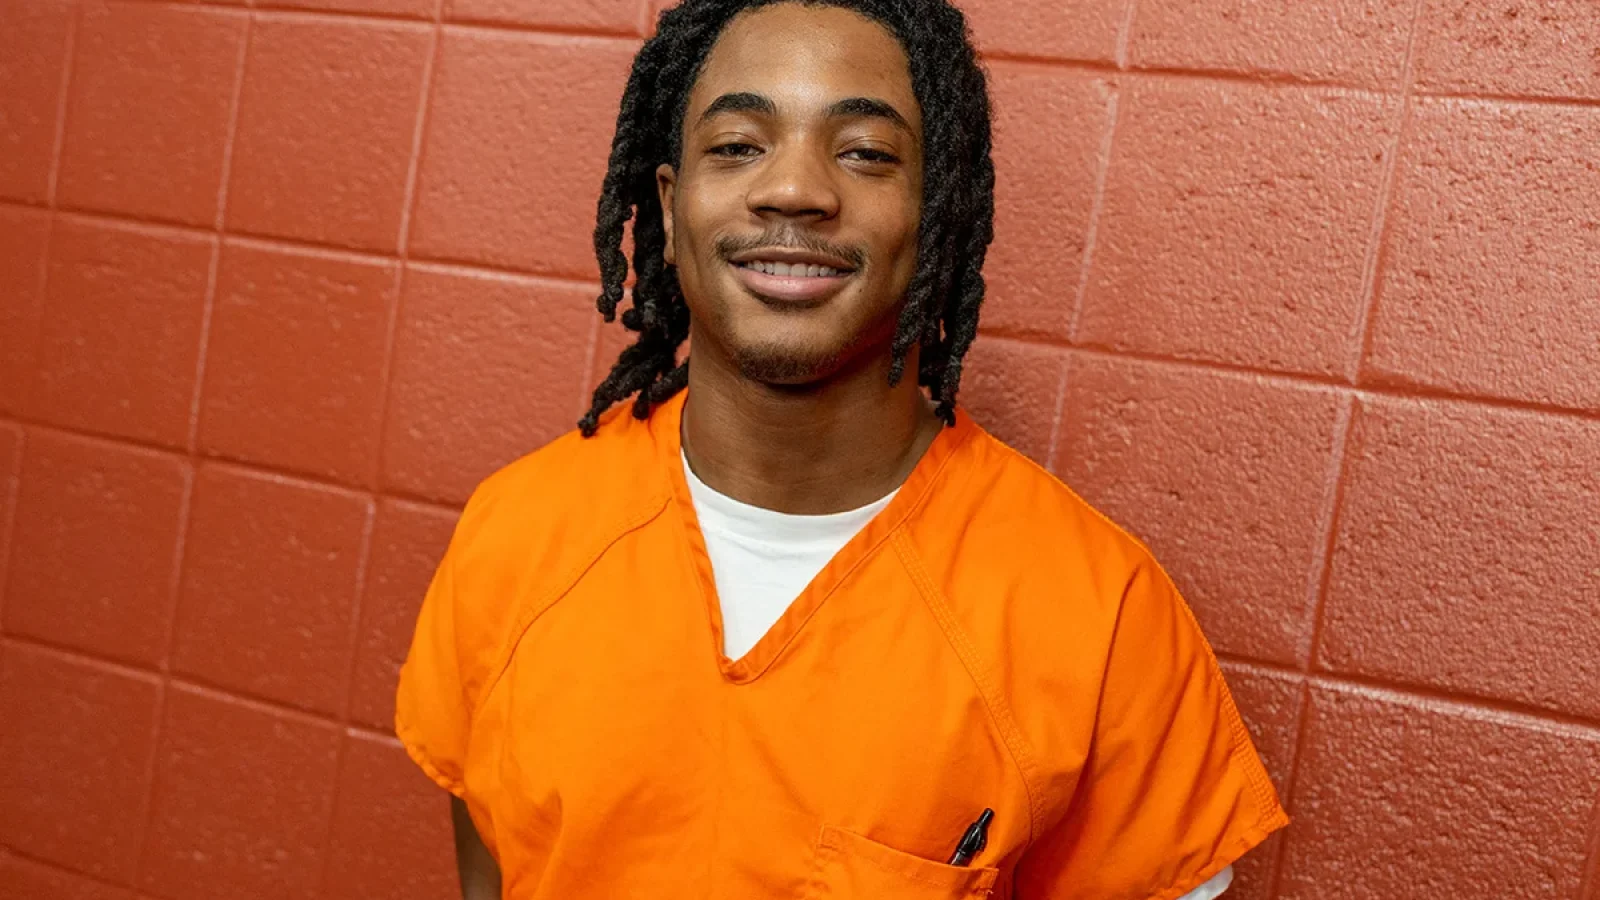 Georgetown Prison Scholar Keonte Lewis wears an orange jumpsuit in the DC jail, smiling at the camera.